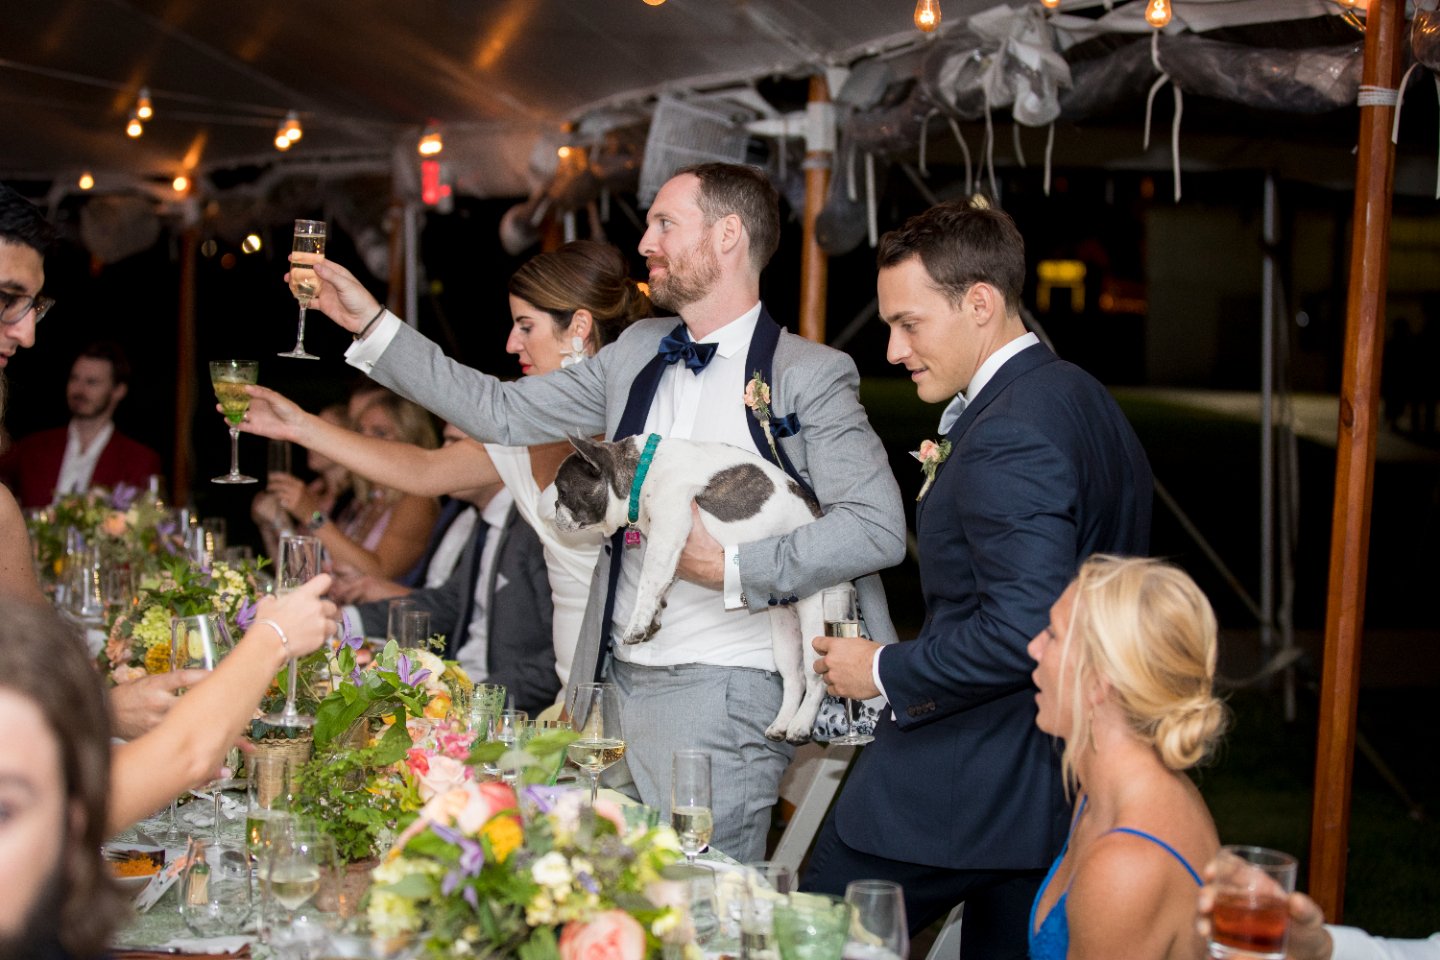 Toasts during reception with your pup in hand? Check! 
Laughter and champagne? Check! 
Am I a nerd for how I worded this? Check, check! 
Xoxo, 
Jules